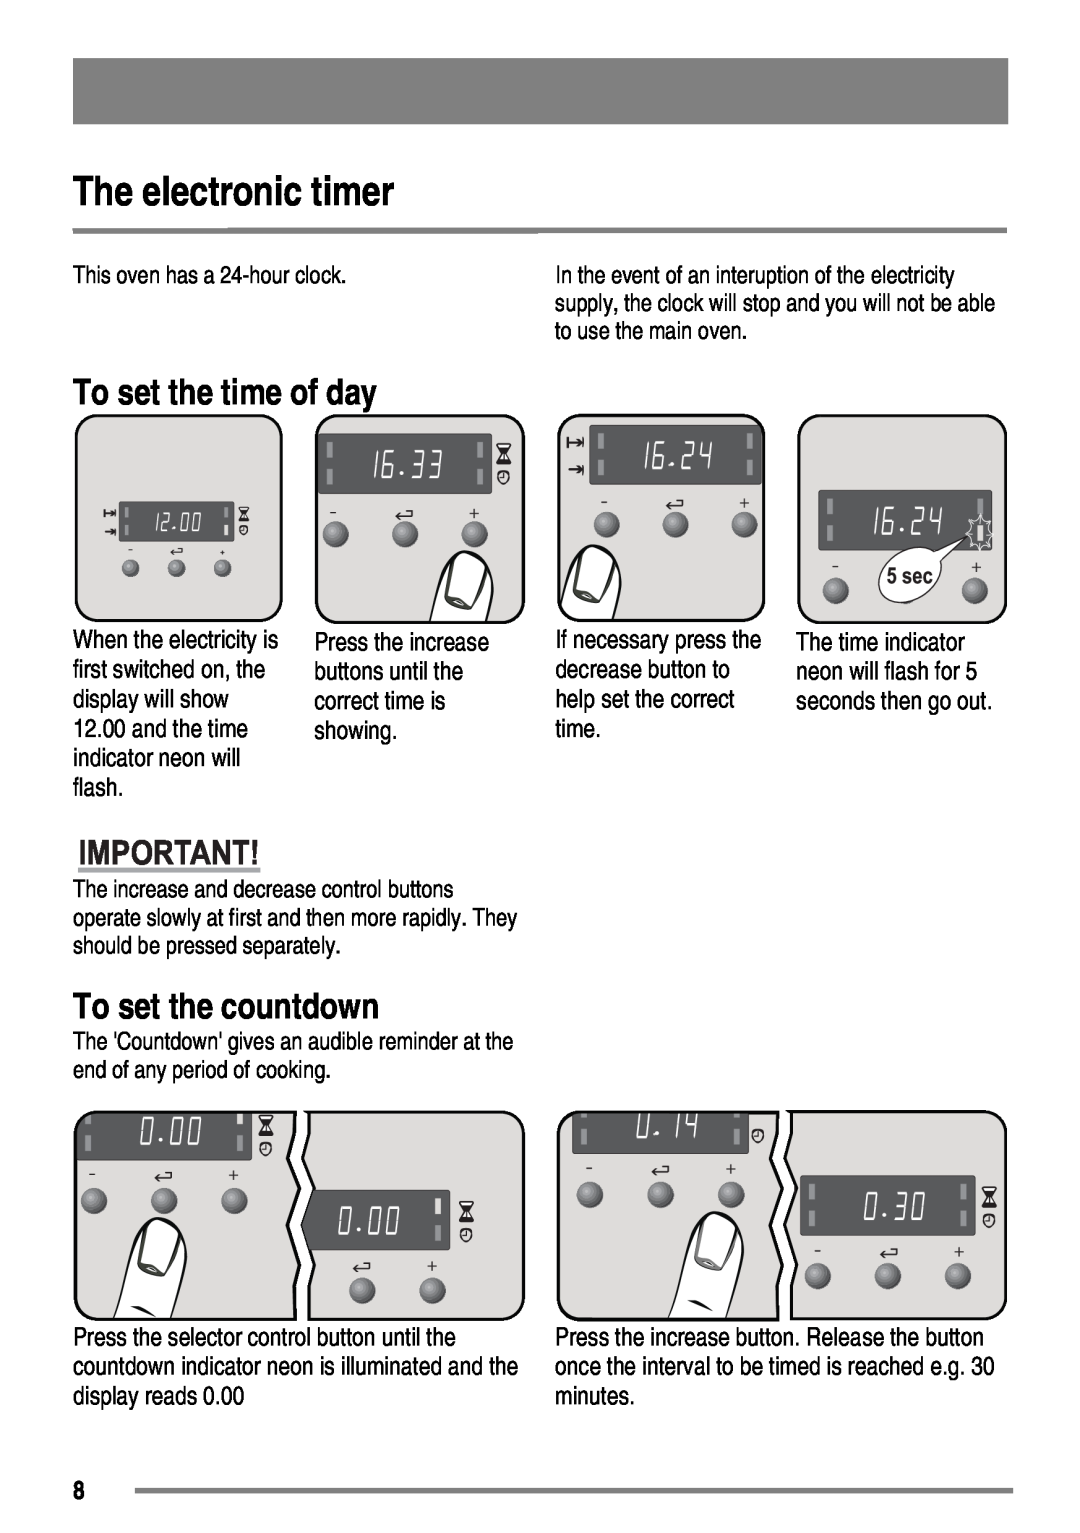 Zanussi ZKC6040 user manual The electronic timer, To set the time of day, To set the countdown 